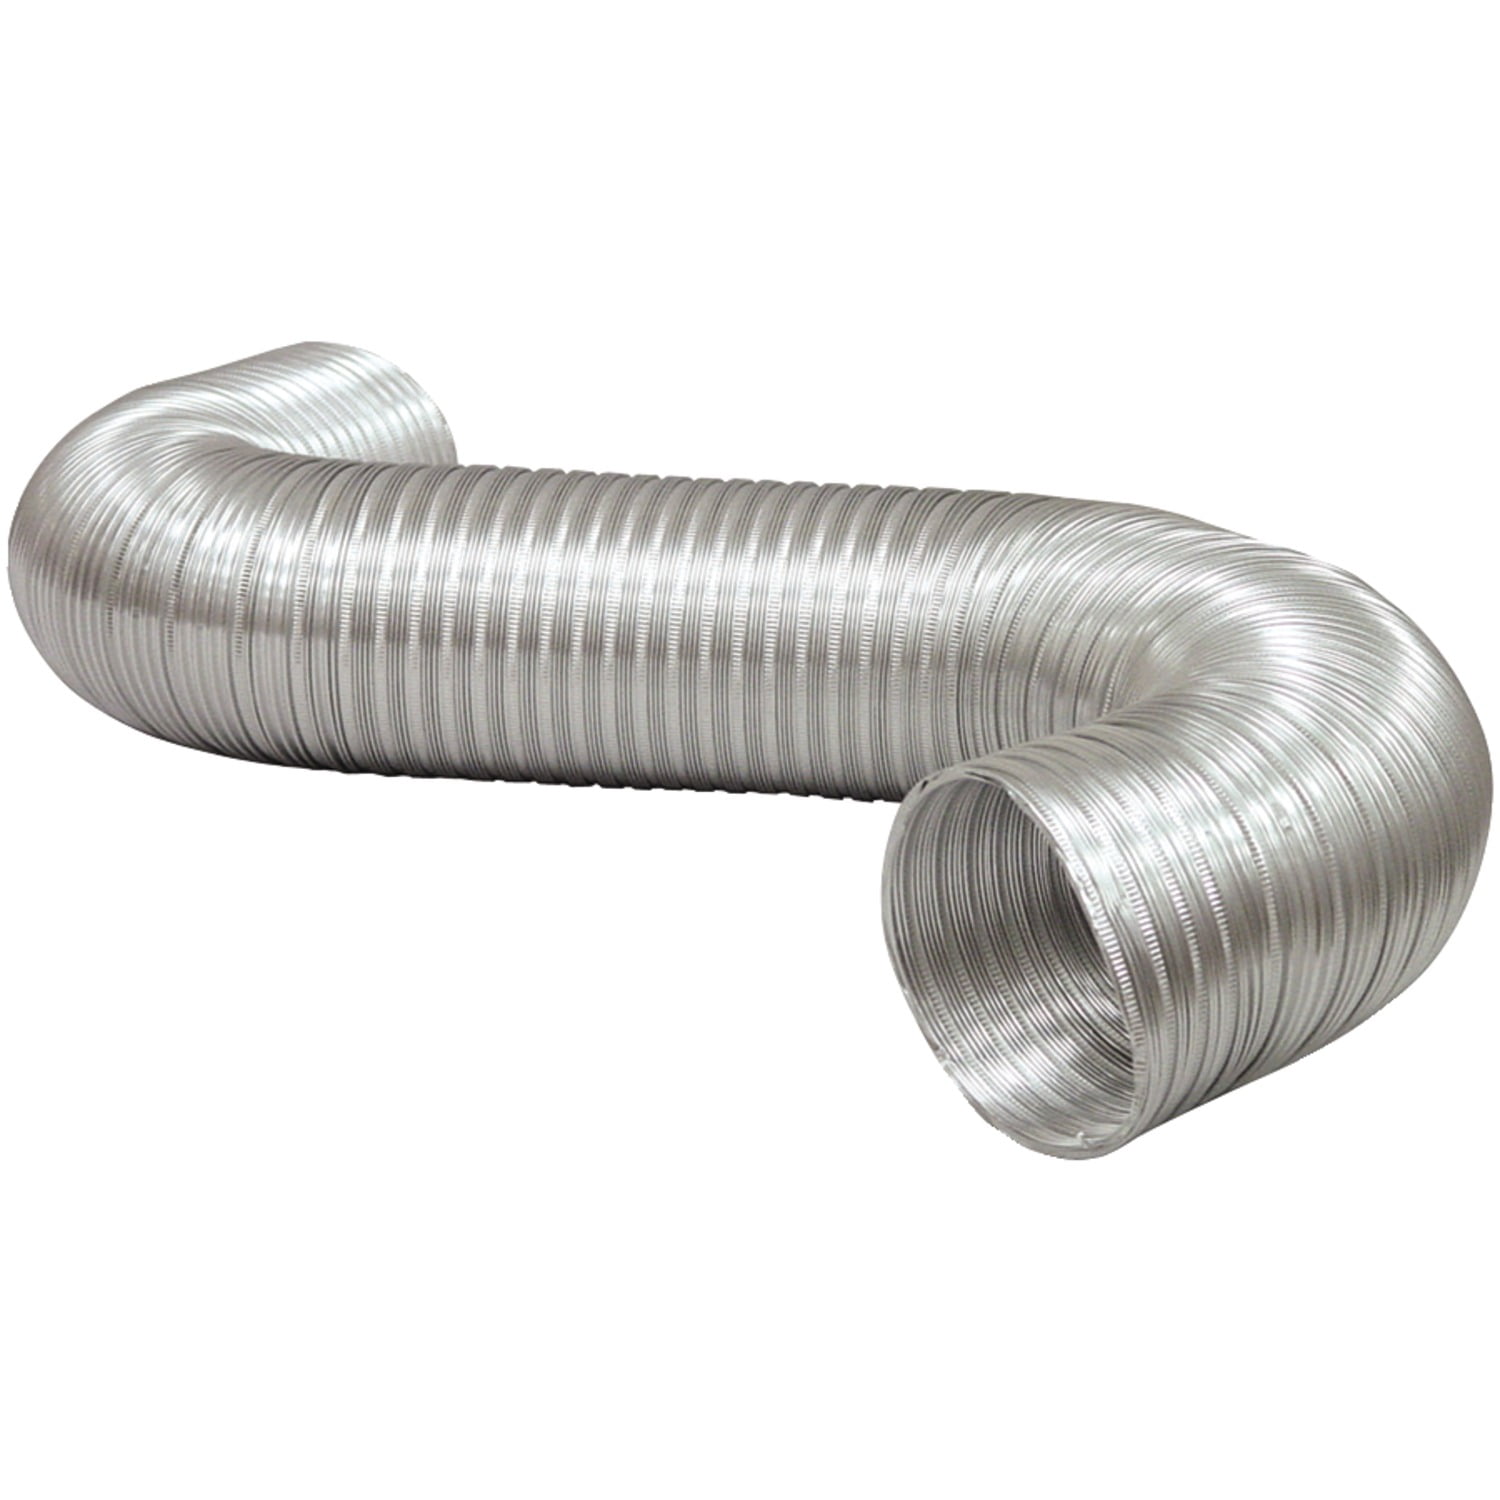 x 8-Ft 5-In Flexible - Quantity 1 Details about   304 Aluminum Duct Pipe 